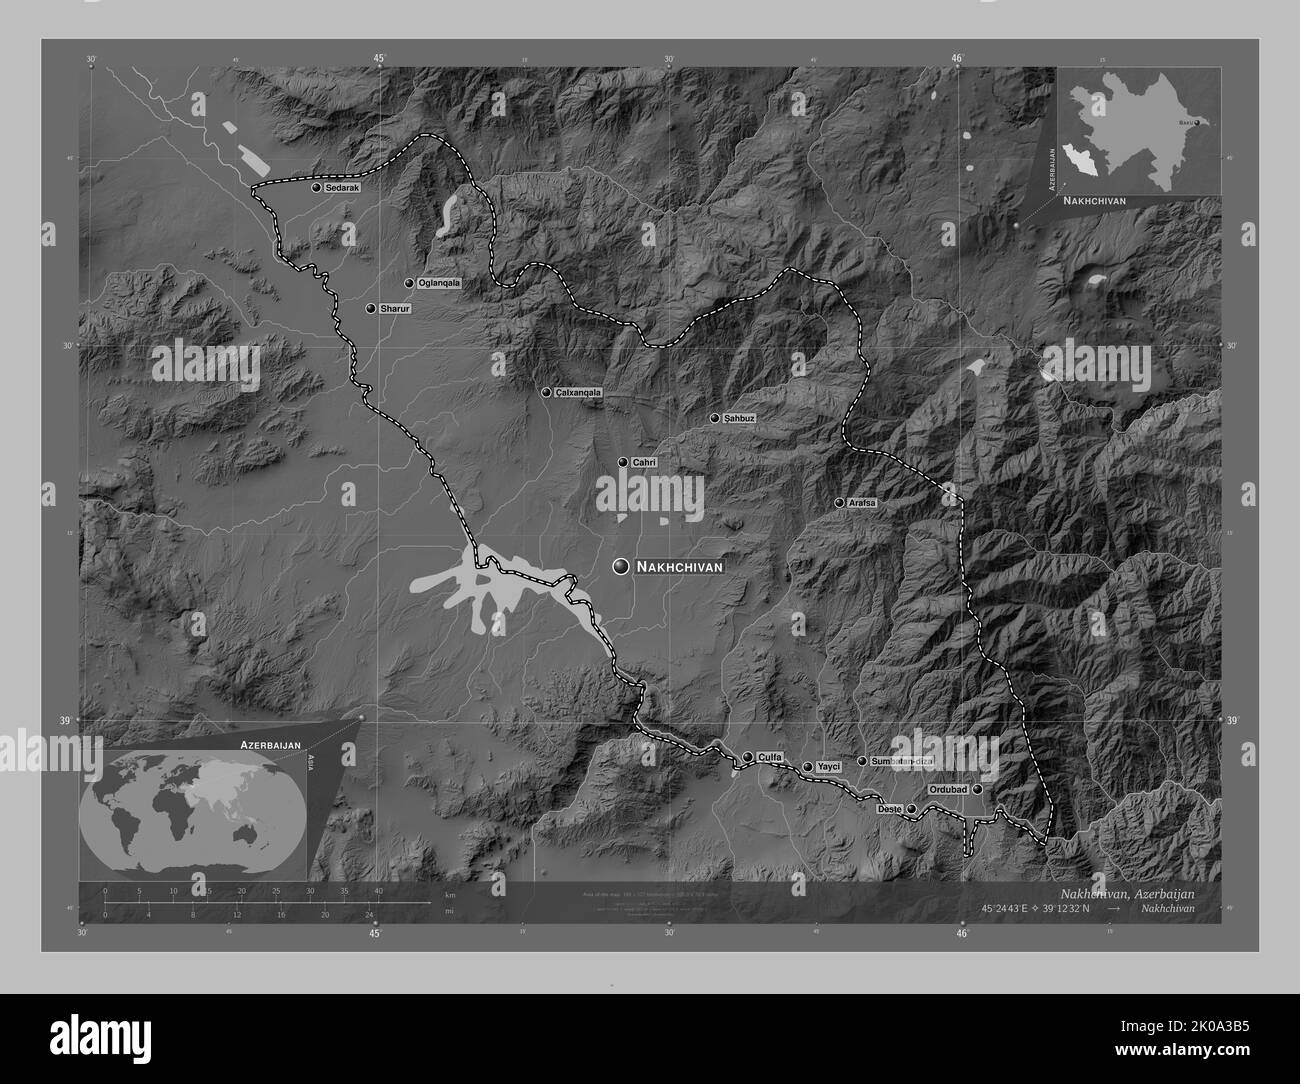 Nakhchivan, region of Azerbaijan. Grayscale elevation map with lakes and rivers. Locations and names of major cities of the region. Corner auxiliary l Stock Photo